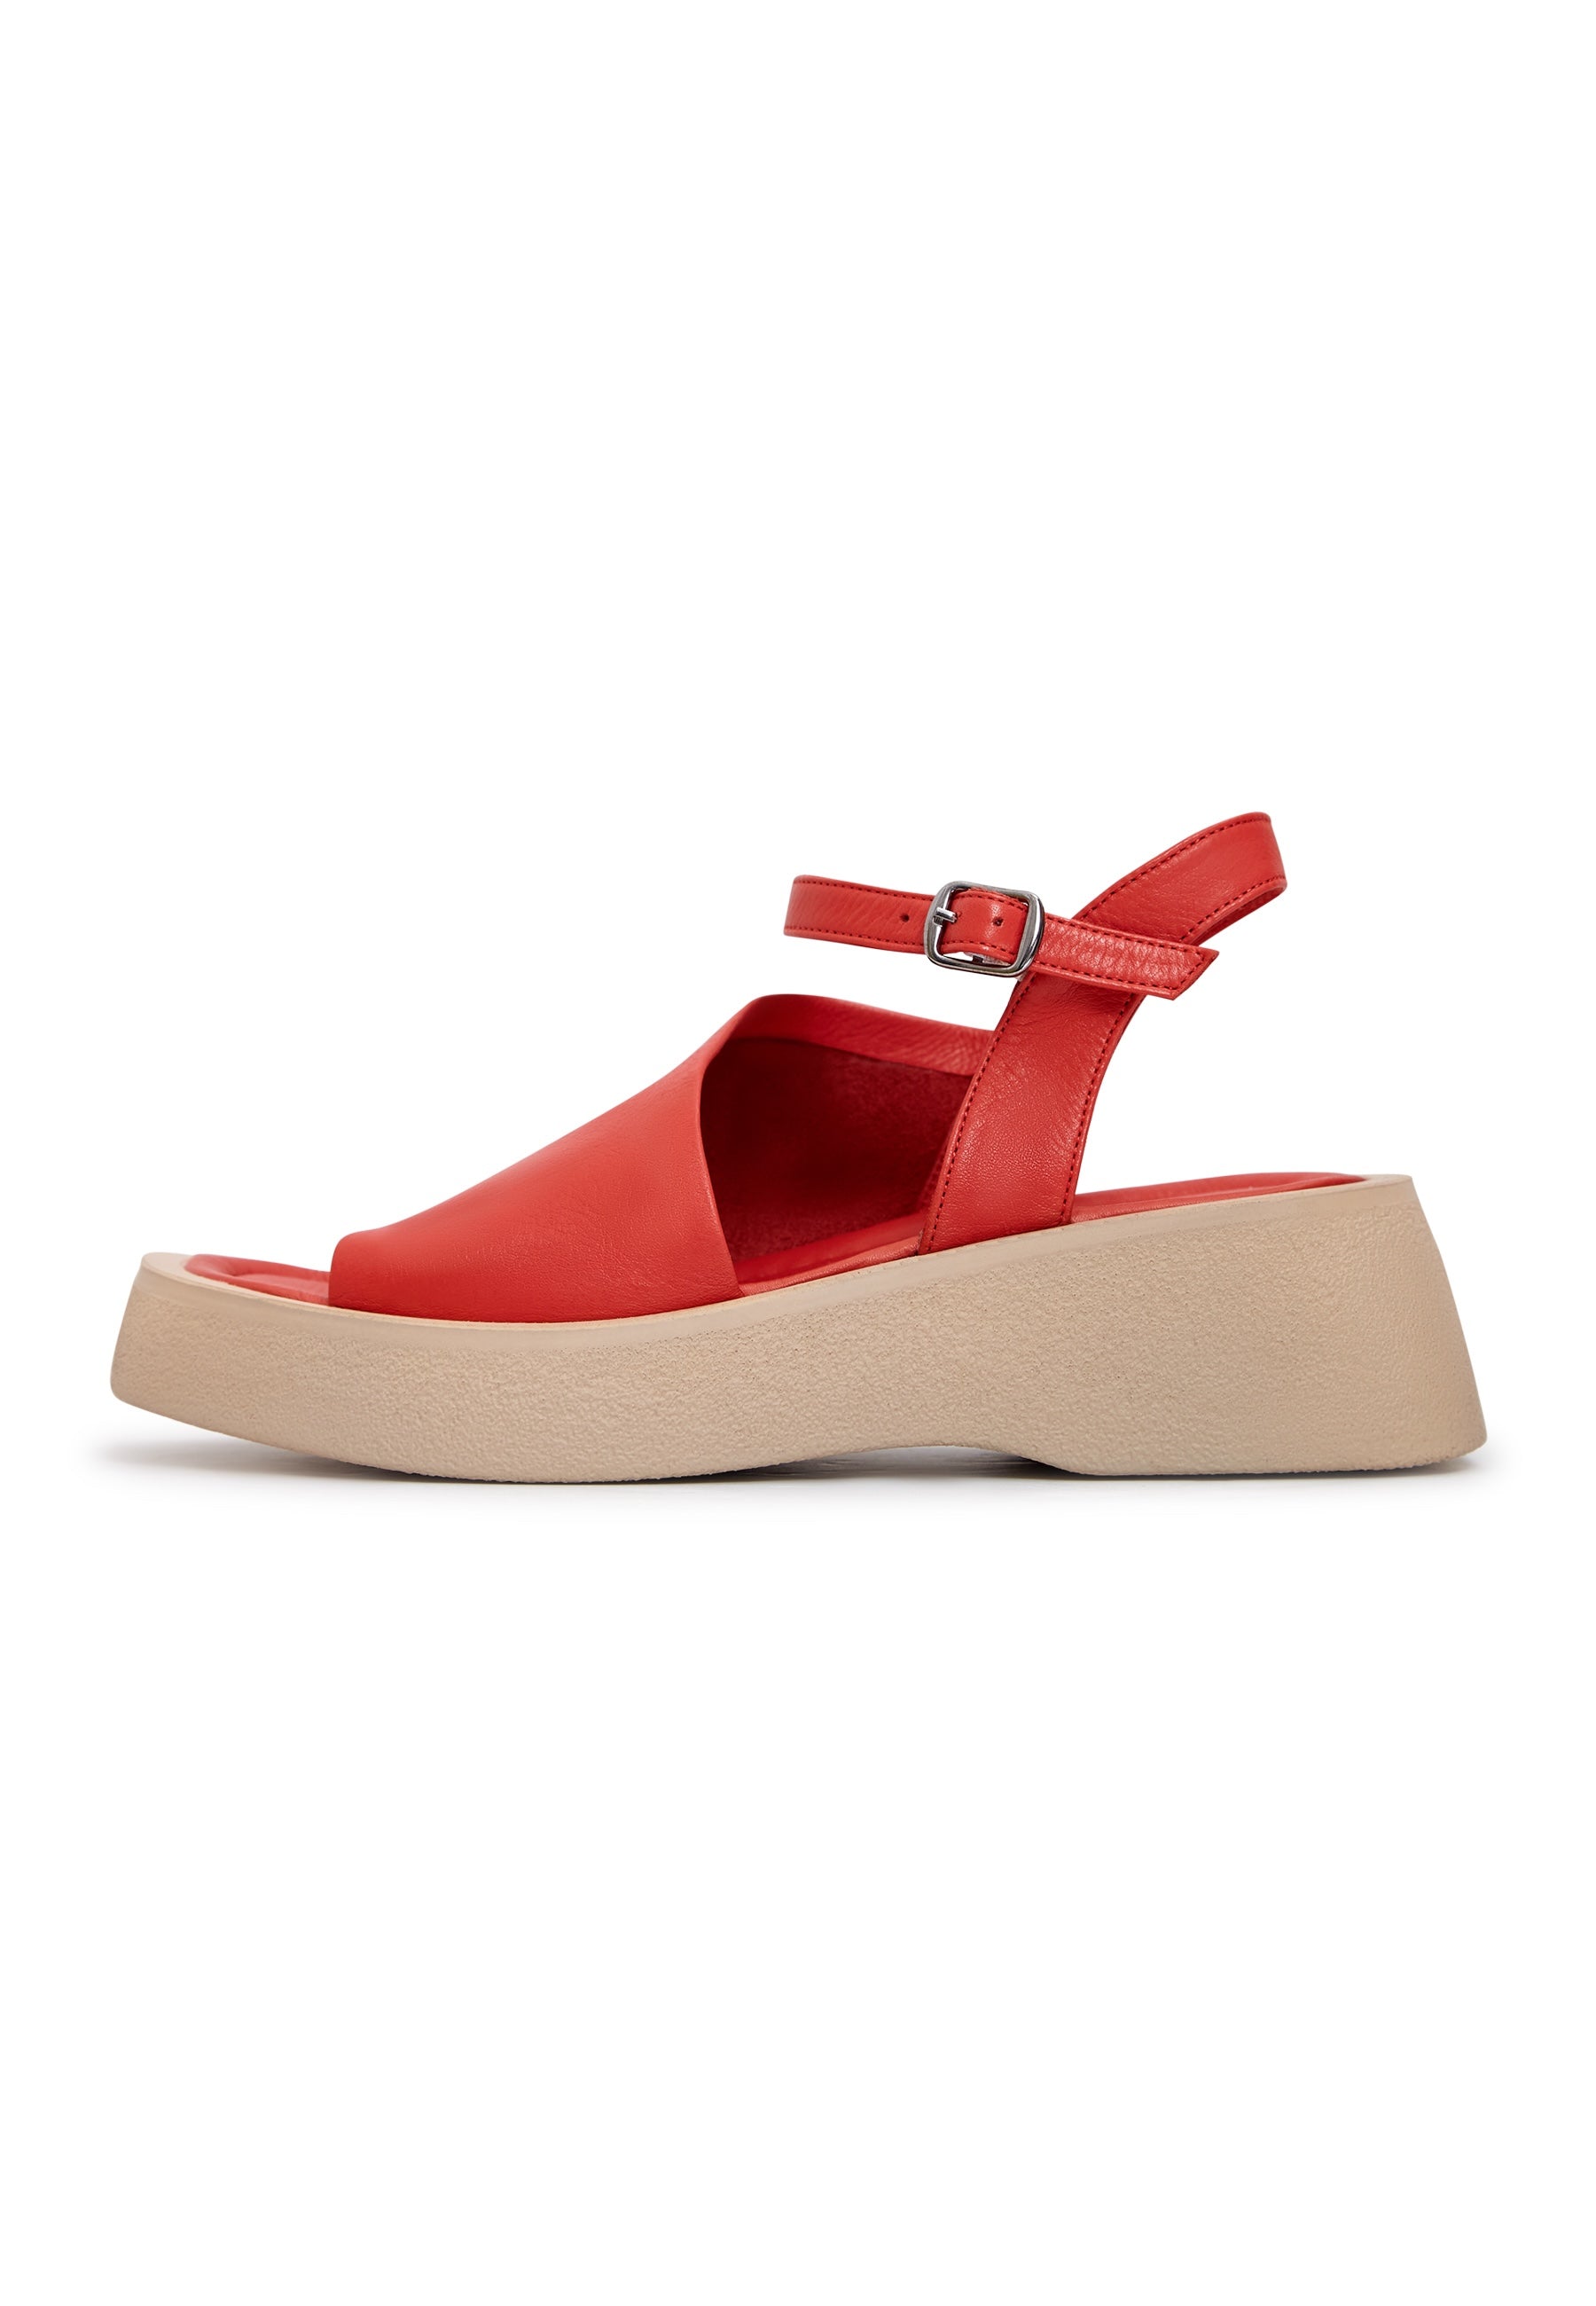 Fanxing Womens Wedges Wide Width Slip-On Casual Platform Sandals Open Toe  Comfortable Chunky Sandals Beach Shoes for Summer - Walmart.com